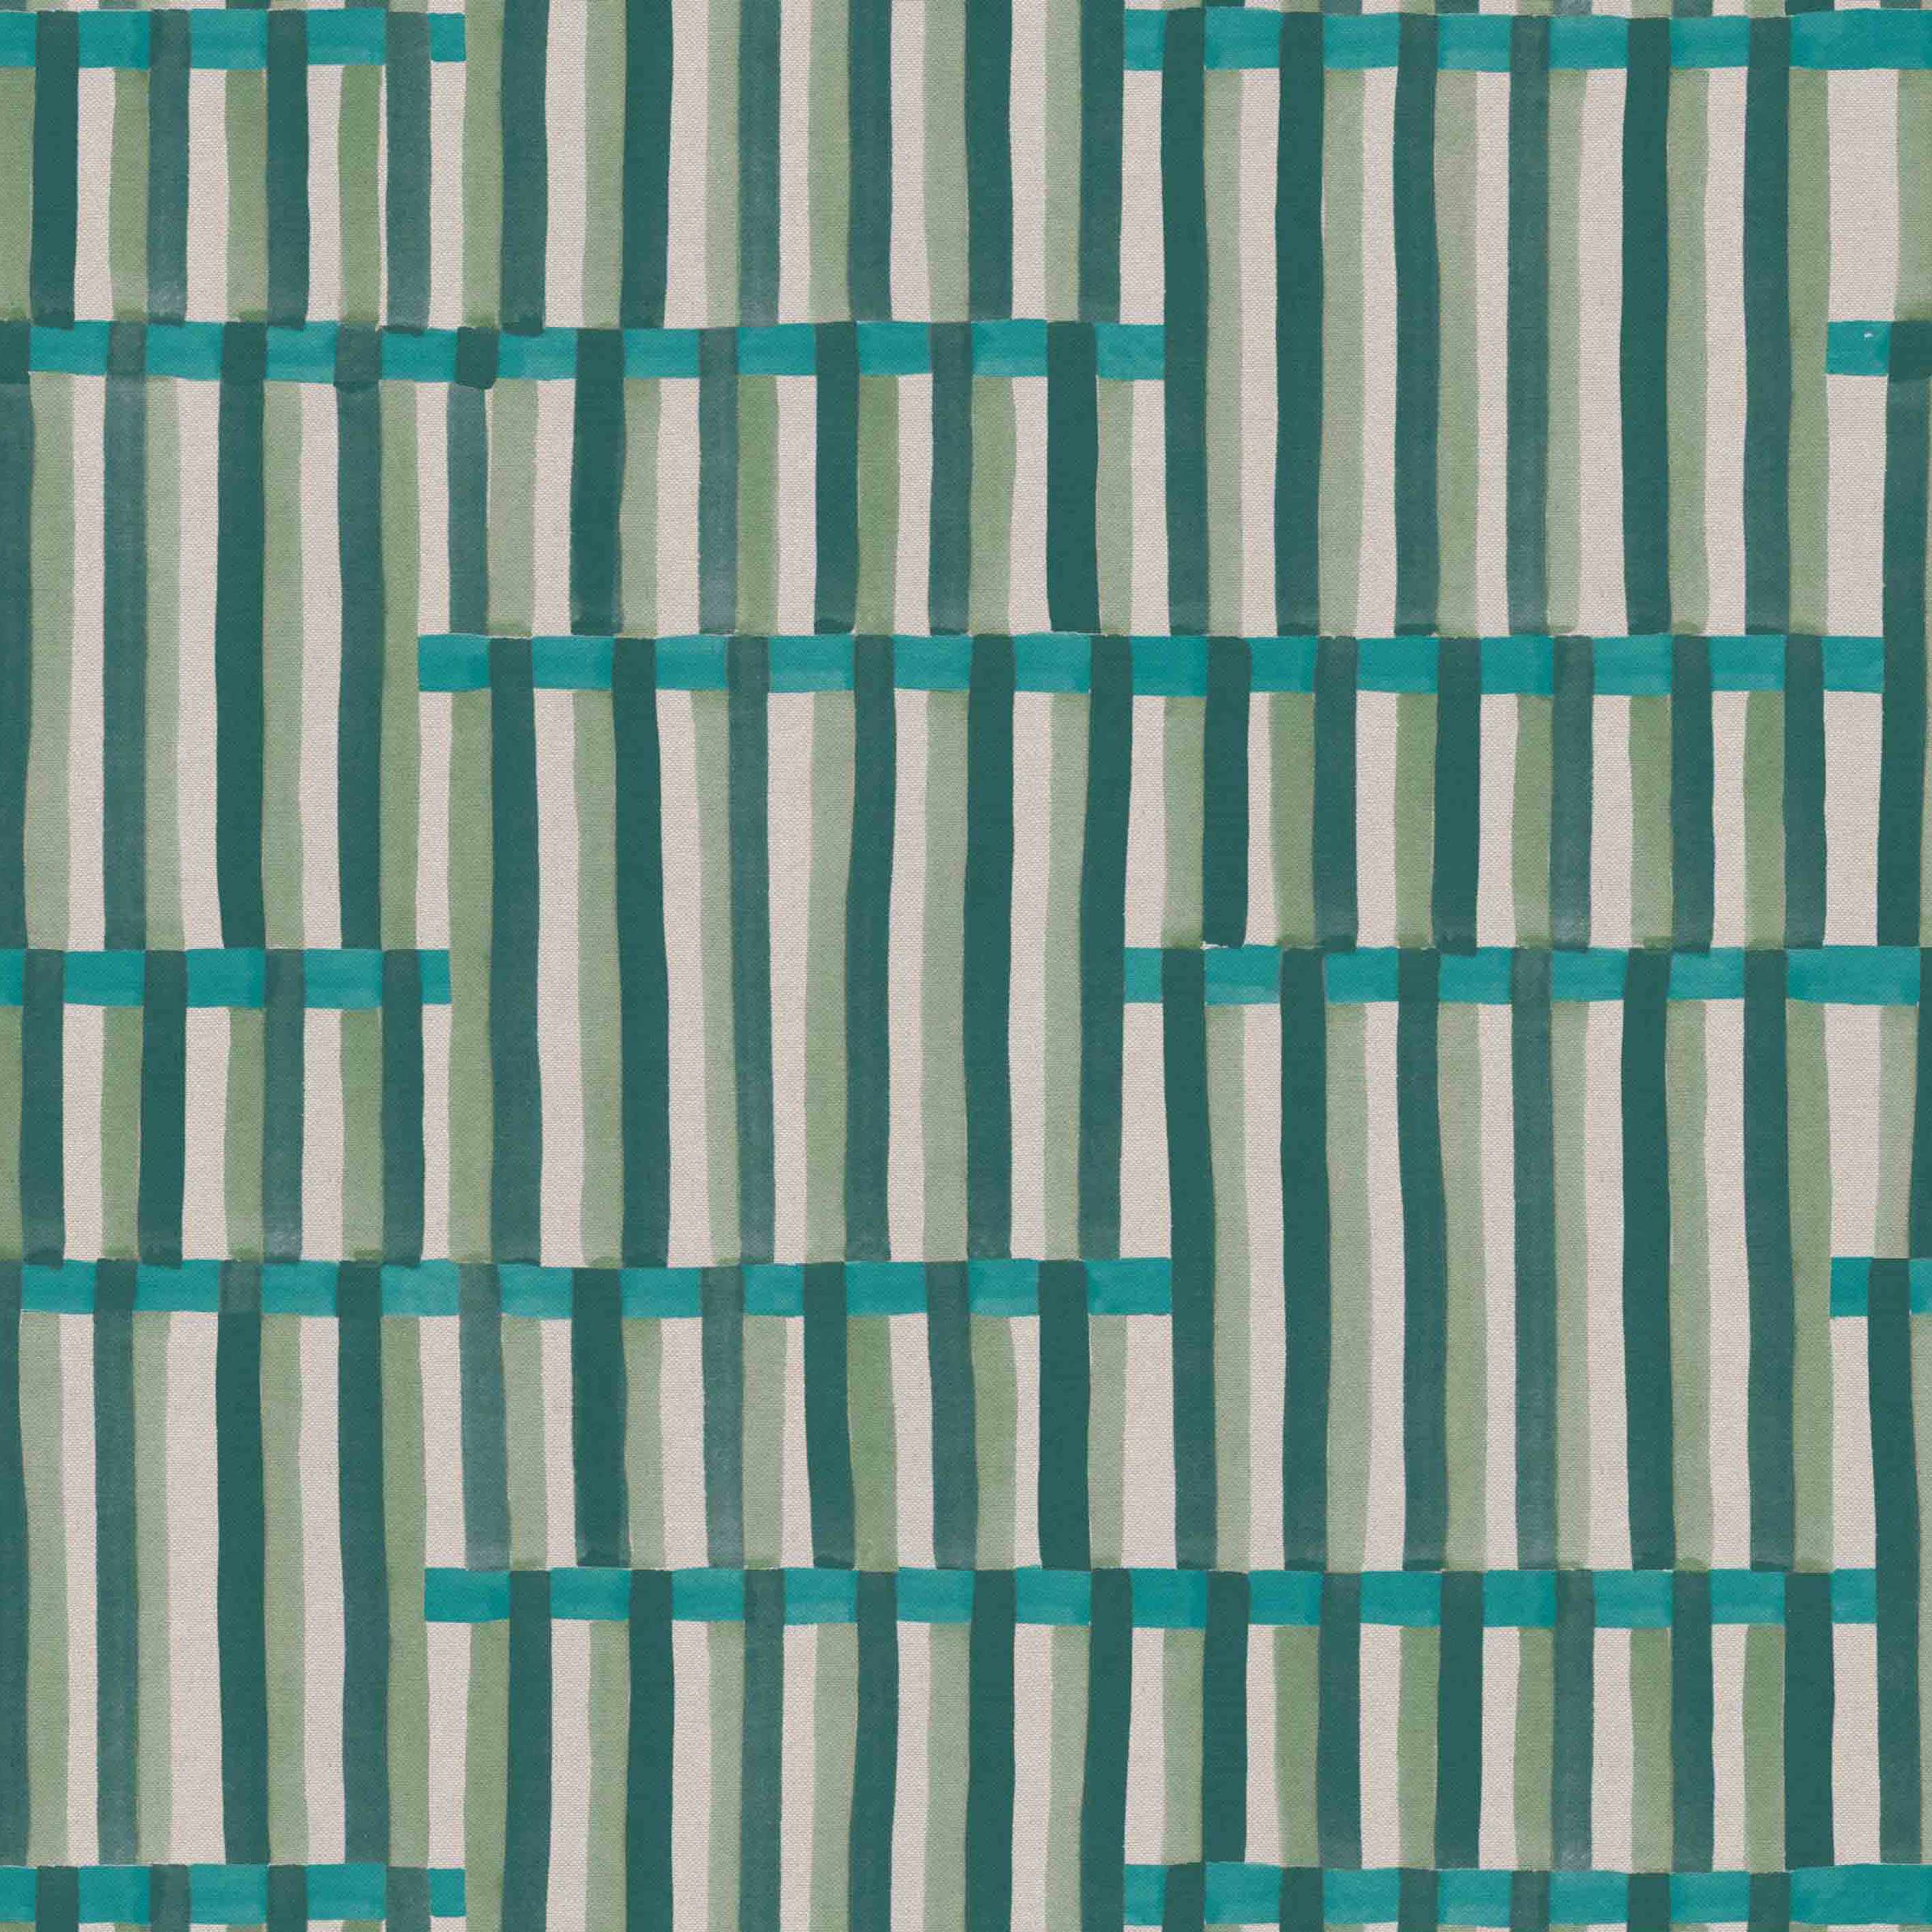 Detail of fabric in an interlocking striped pattern in shades of turquoise, green and cream.